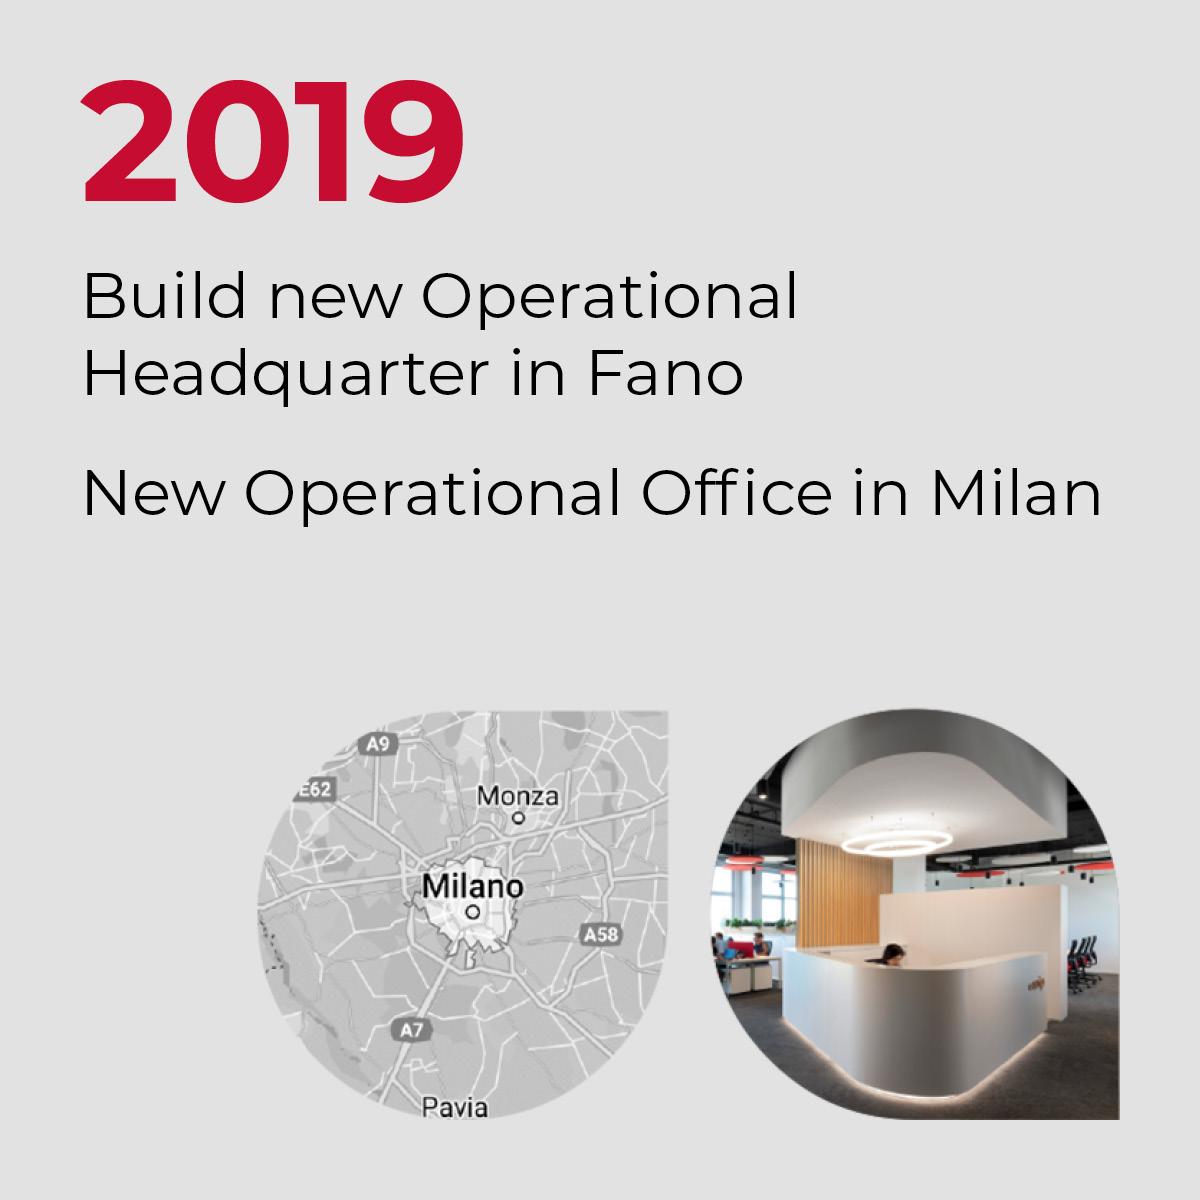 2019, Build new Operational Headquarter in Fano, New Operational Office in Milan